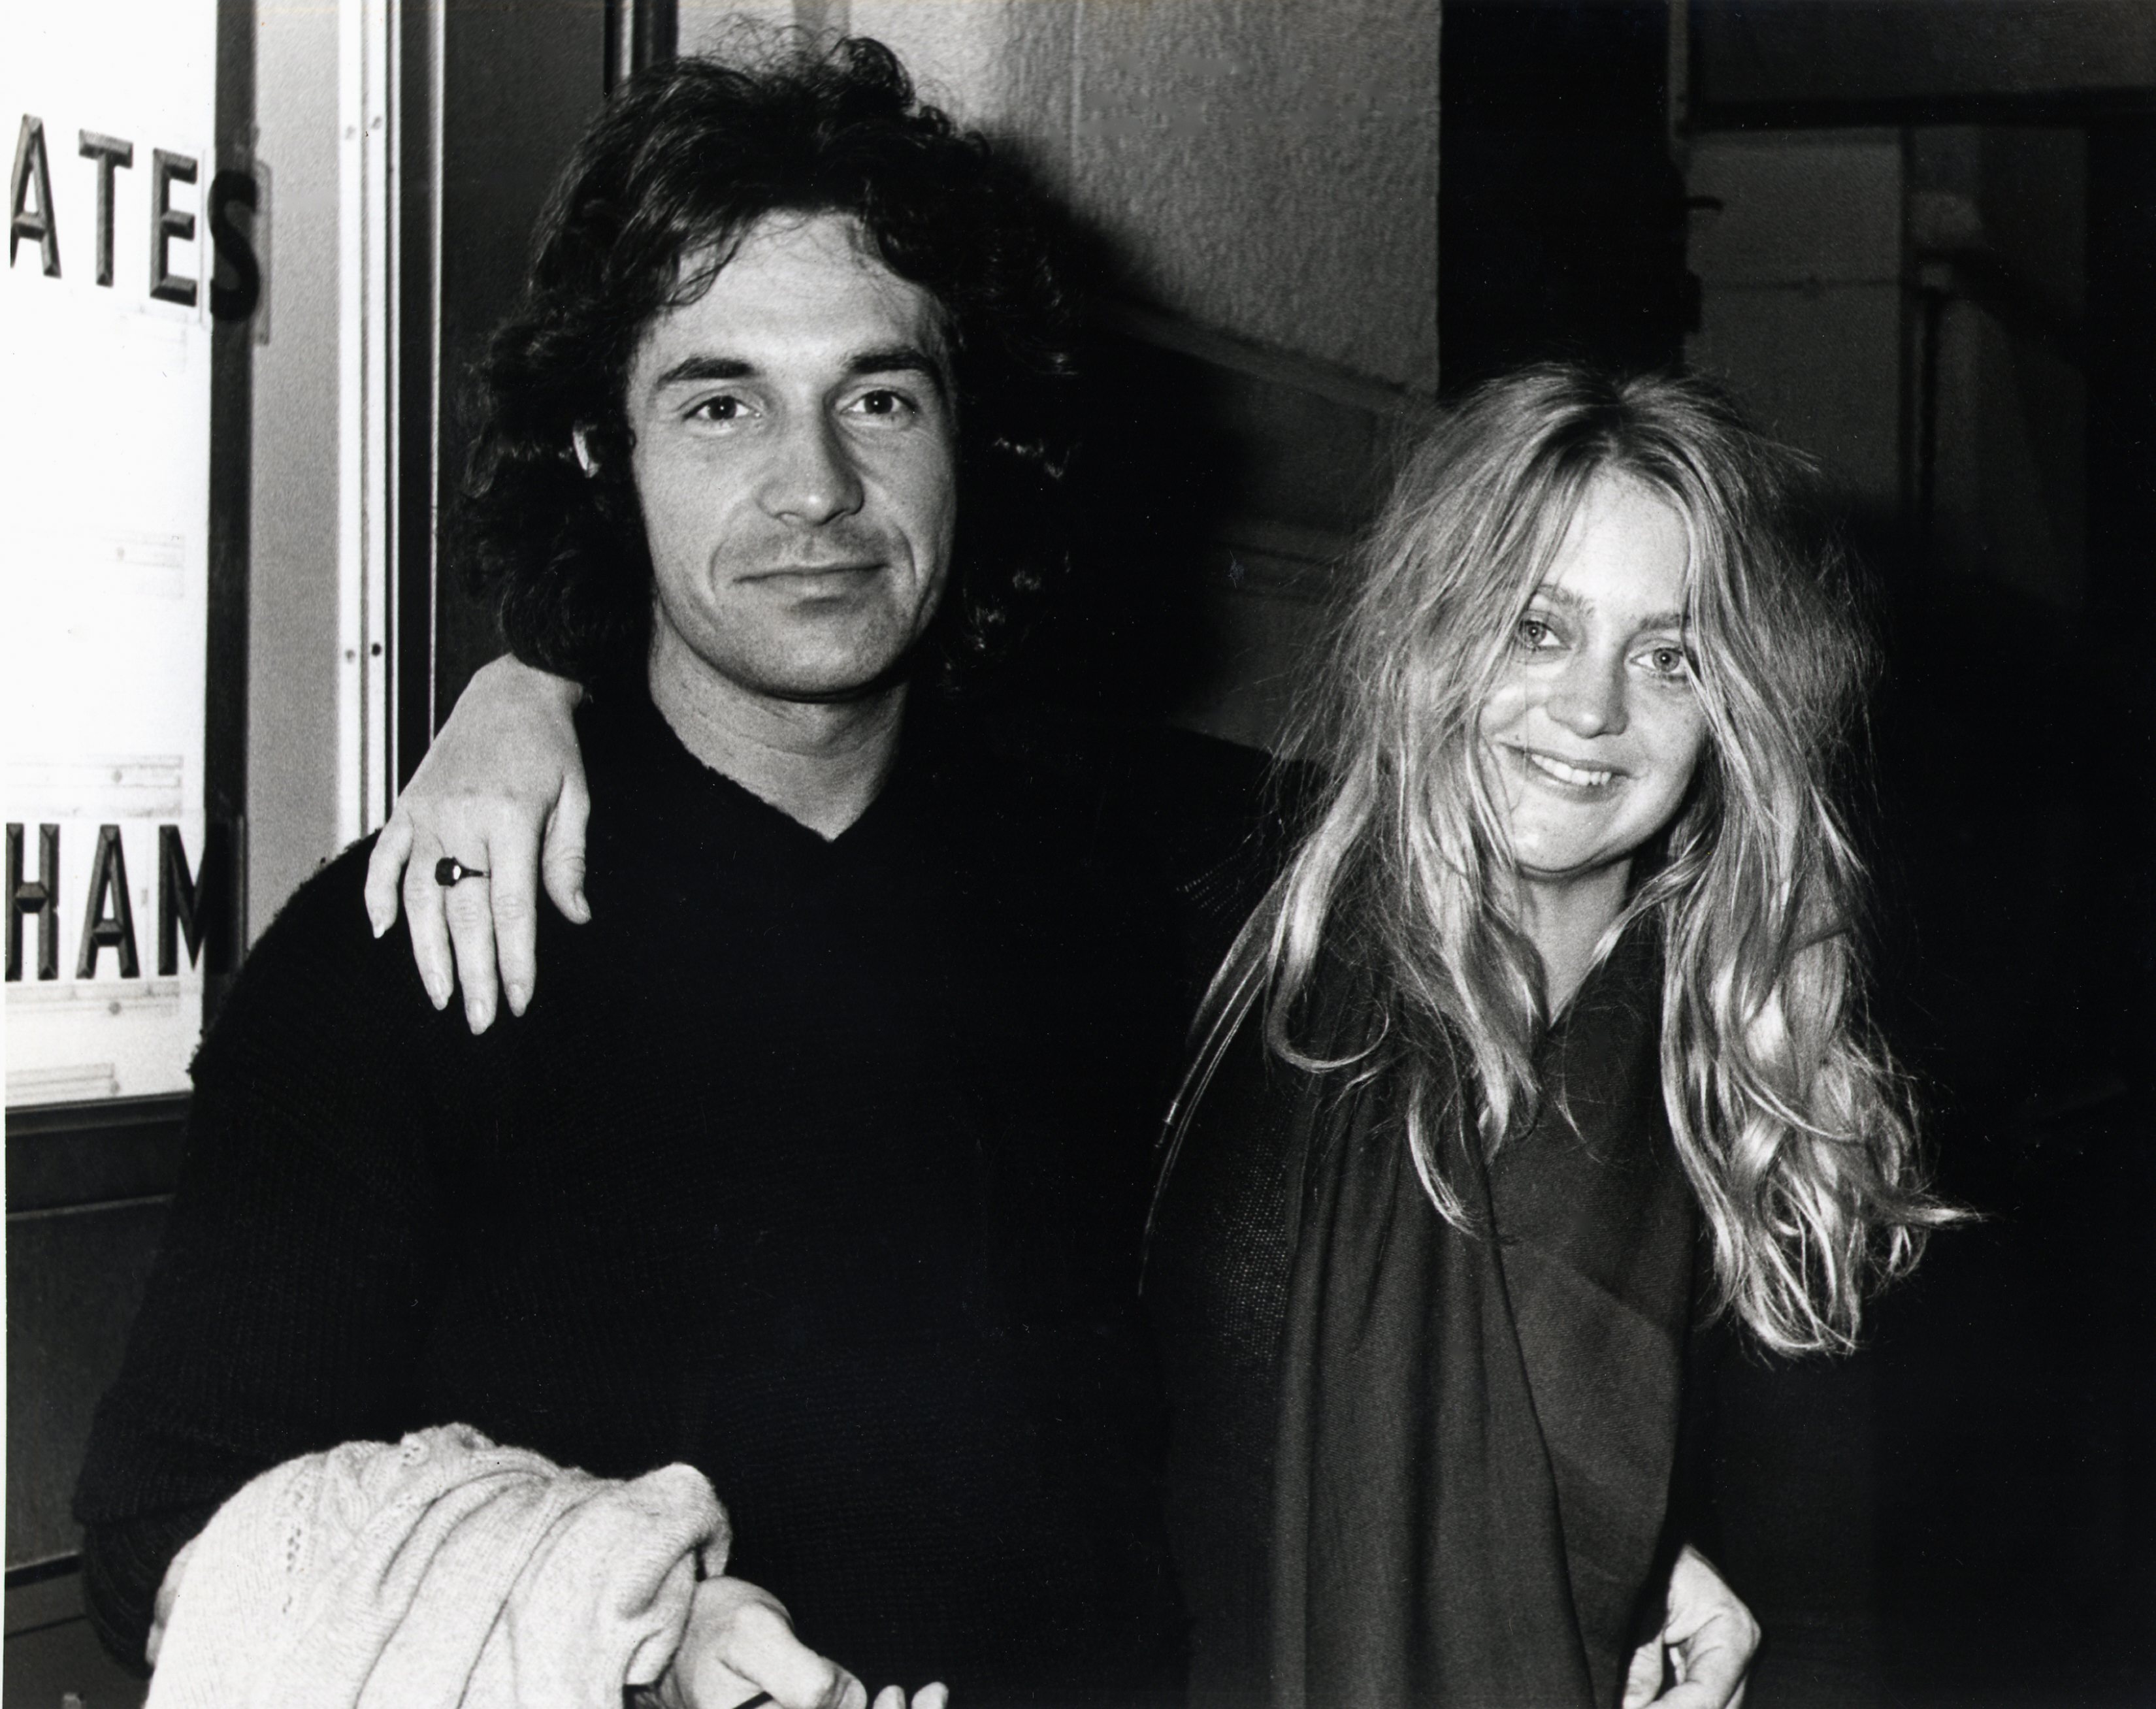 Bill Hudson and Goldie Hawn photographed together in 1976 | Source: Getty Images